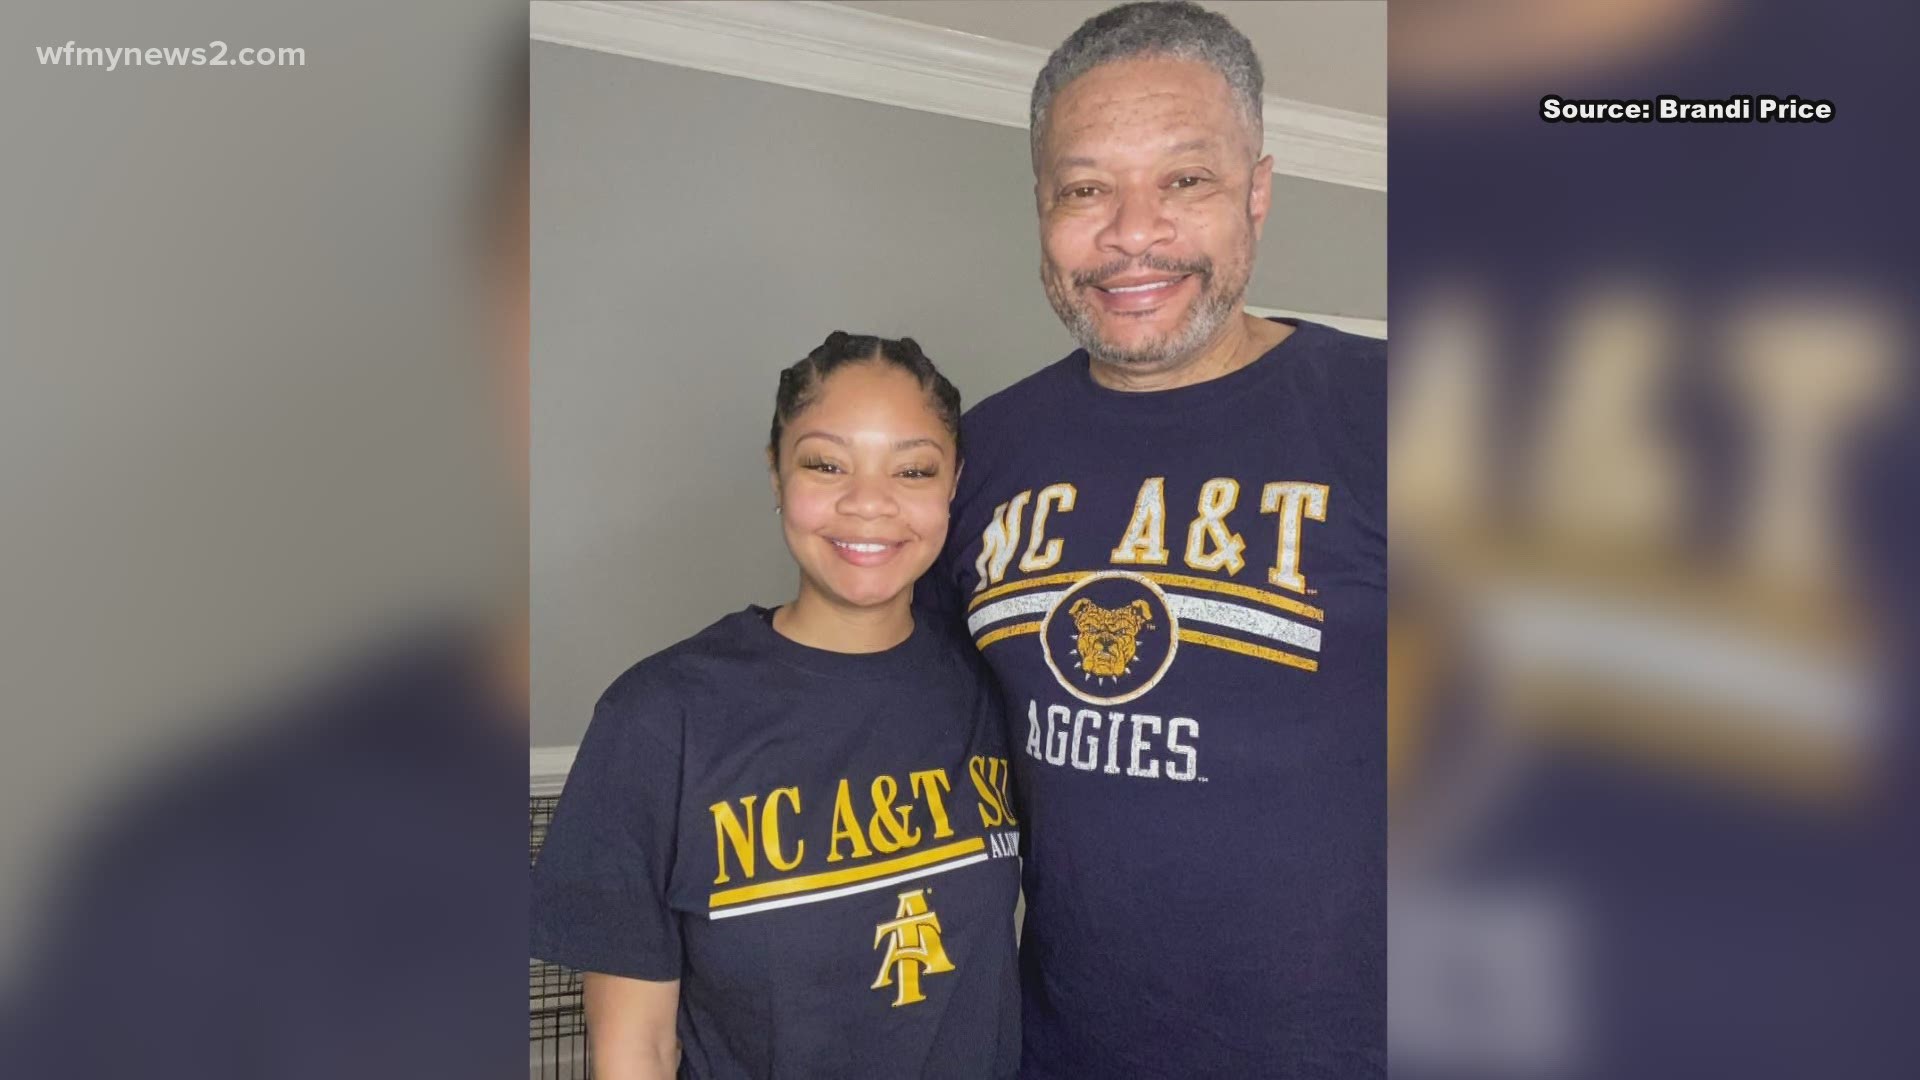 Brandi Price lost both her mother and grandmother while in college. But this spring she graduates from NC A&T with her father.